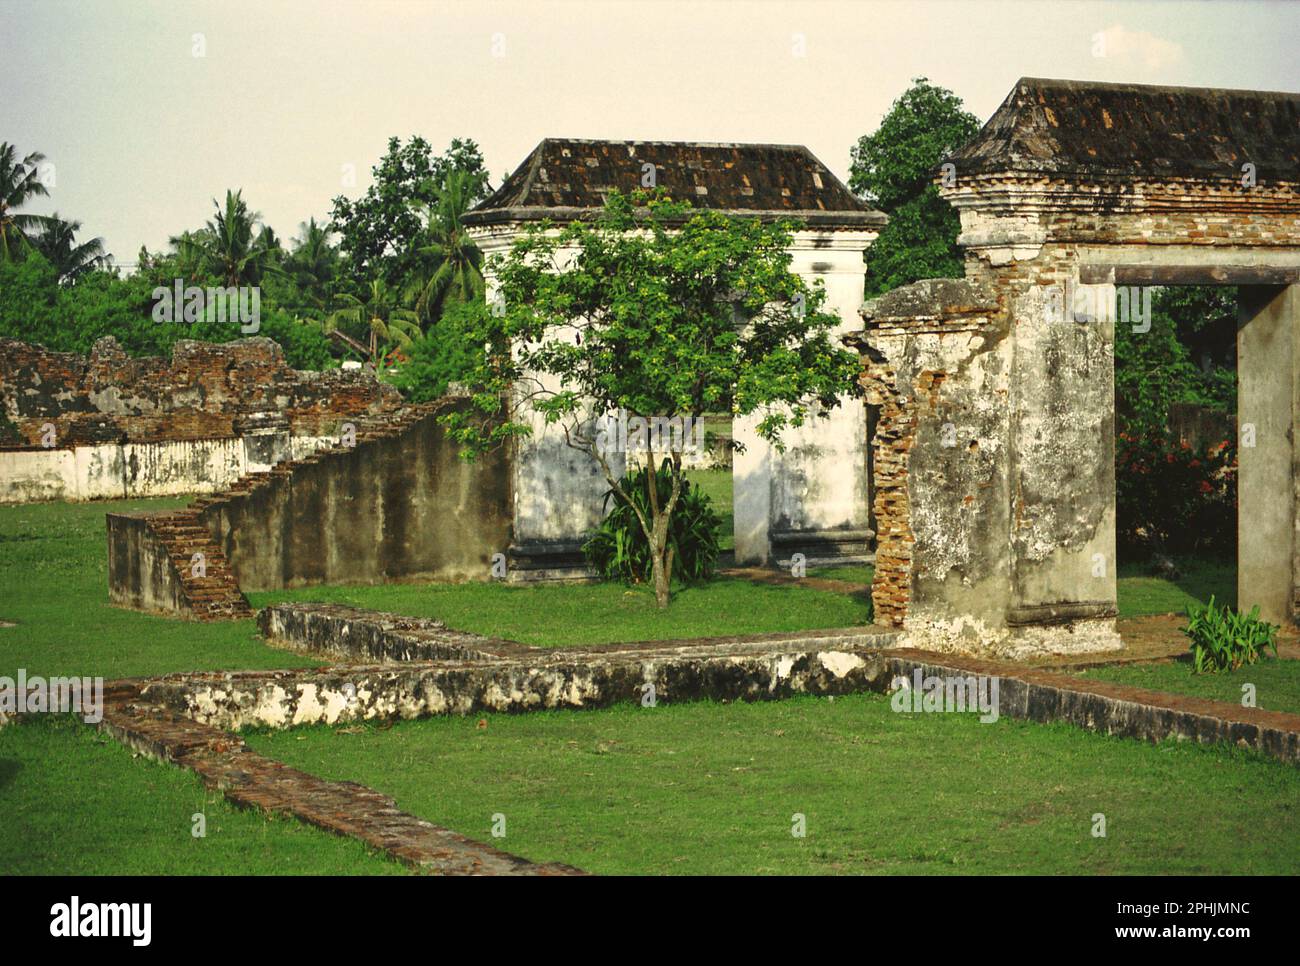 The remaining of Kaibon palace, one of the cultural heritage objects from Banten Sultanate period located in area now called Banten Lama (Old Banten) in Serang, Banten, Indonesia. 'The sustainability of cultural heritage is strongly linked to the effective participation of local communities in the conservation and management of these resources,' according to a team of scientists led by Sunday Oladipo Oladeji in their research article published on Sage Journals on October 28, 2022. Banten Lama (Old Banten) area was a part of the important port of Banten Sultanate, especially during the... Stock Photo